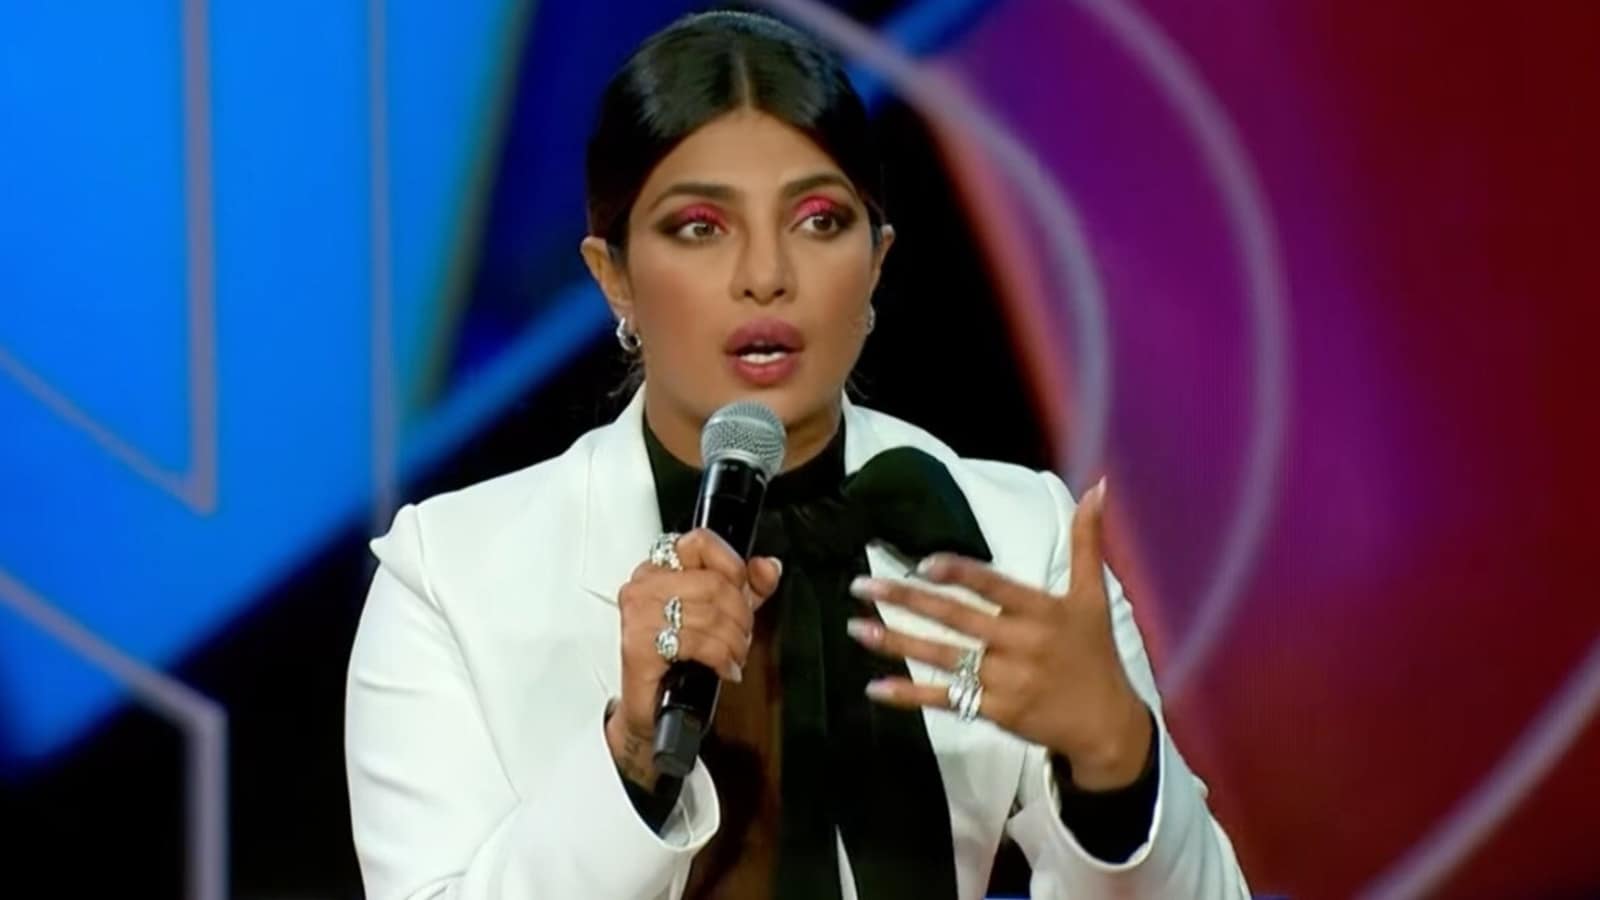 Priyanka Chopra is furious at ‘shameful and disgusting’ perfume ads, asks: ‘How many people thought this was ok?’